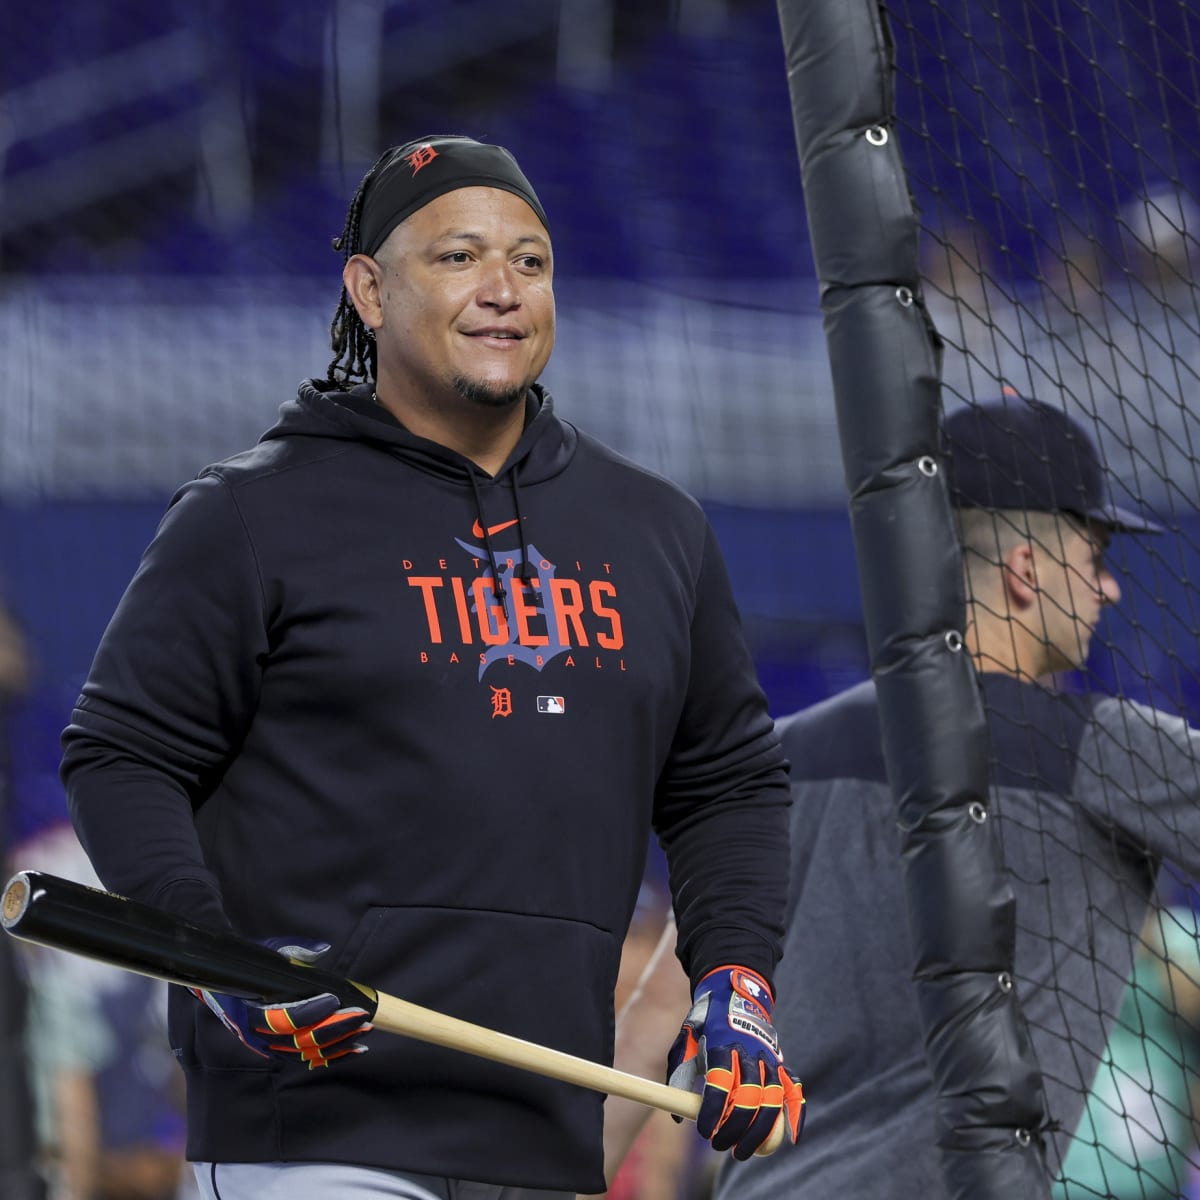 Miami Marlins Pull Out All The Stops For Miguel Cabrera in Return